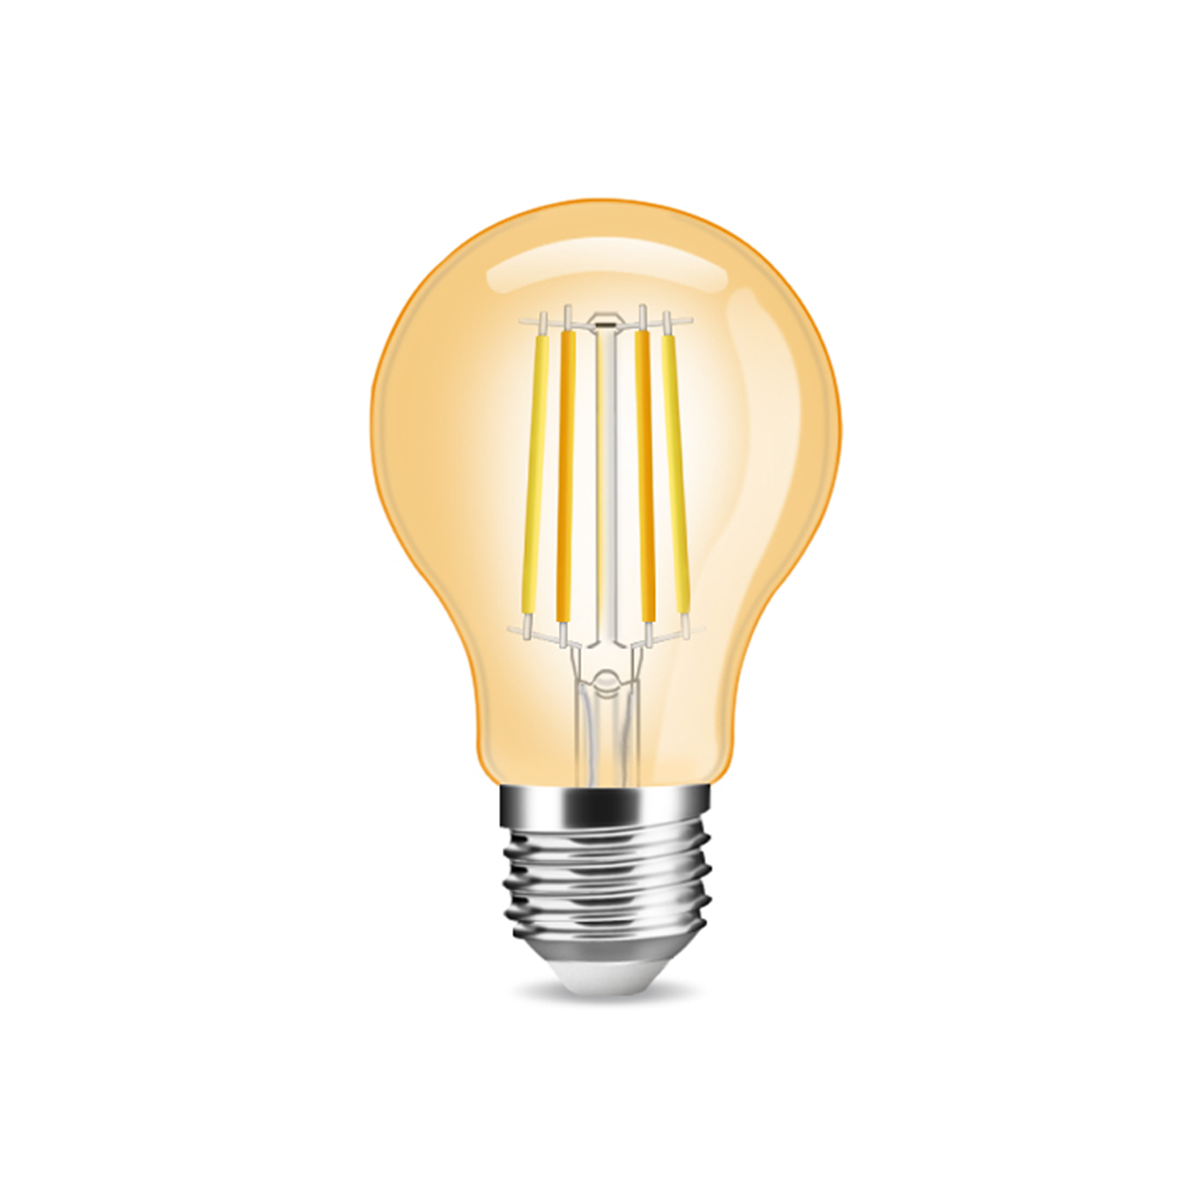 Well-designed Semi Recessed Downlight - Dimmable Smart Filament Bulb E27 Vintage With tunable white 2200-6500K CBM – C-Lux